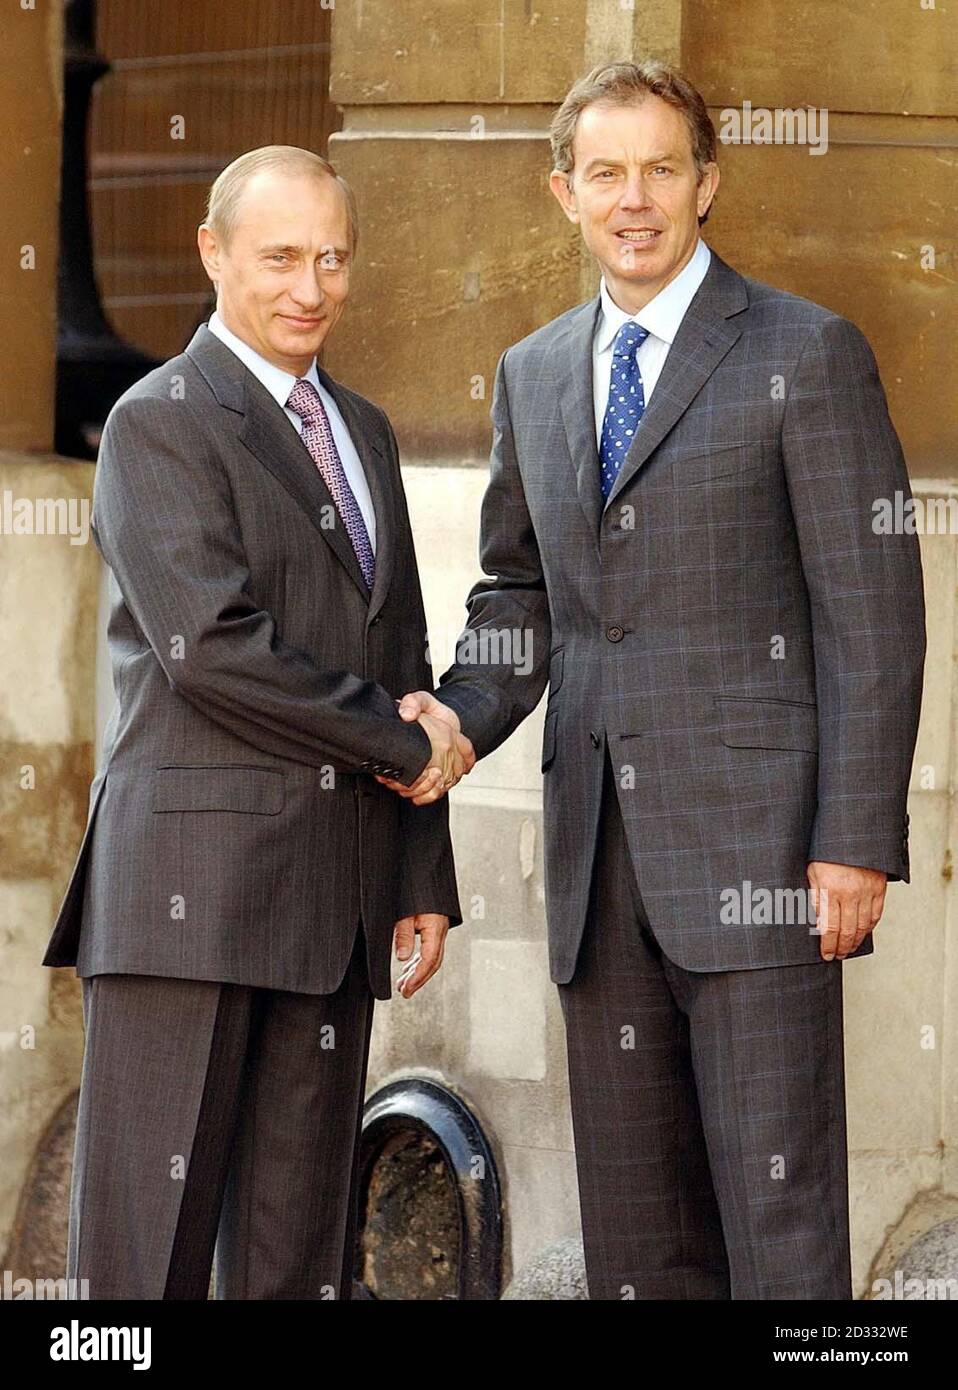 Russia s President Putin (left) shakes hand with British Prime Minister Tony Blair as they arrive at Lancaster House in London for a Russia-UK energy summit. * Later, after talks at Downing Street, President Putin, on the last full day of his state visit to Britain, was vsiting St Paul s Cathedral, the Tower of London and the Royal Observatory at Greenwich, and in the evening was hosting an official banquet at Spencer House attended by the Queen. 13/08/03 The BBC said Russian President Vladimir Putin authorised for the FBI to have an undercover agent sent to Russia. The arms dealer fle Stock Photo